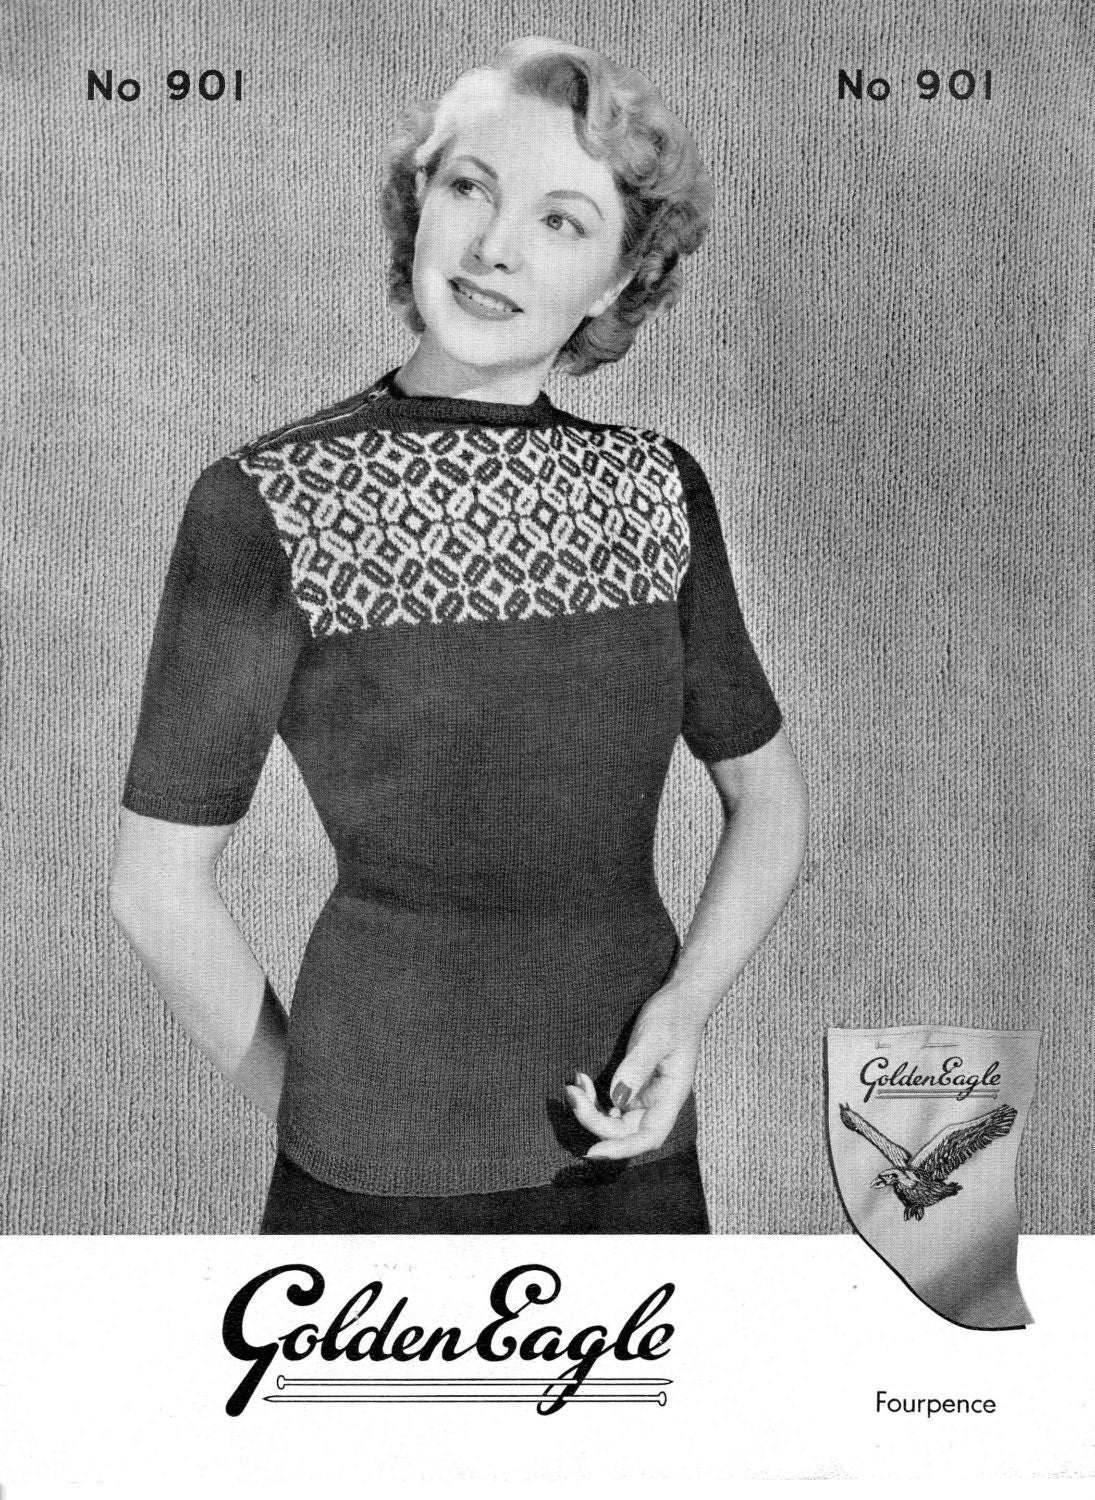 Ladies Classic Fair Isle Jersey Jumper, 34"-36" Bust, 3ply, 50s Knitting Pattern, Golden Eagle 901